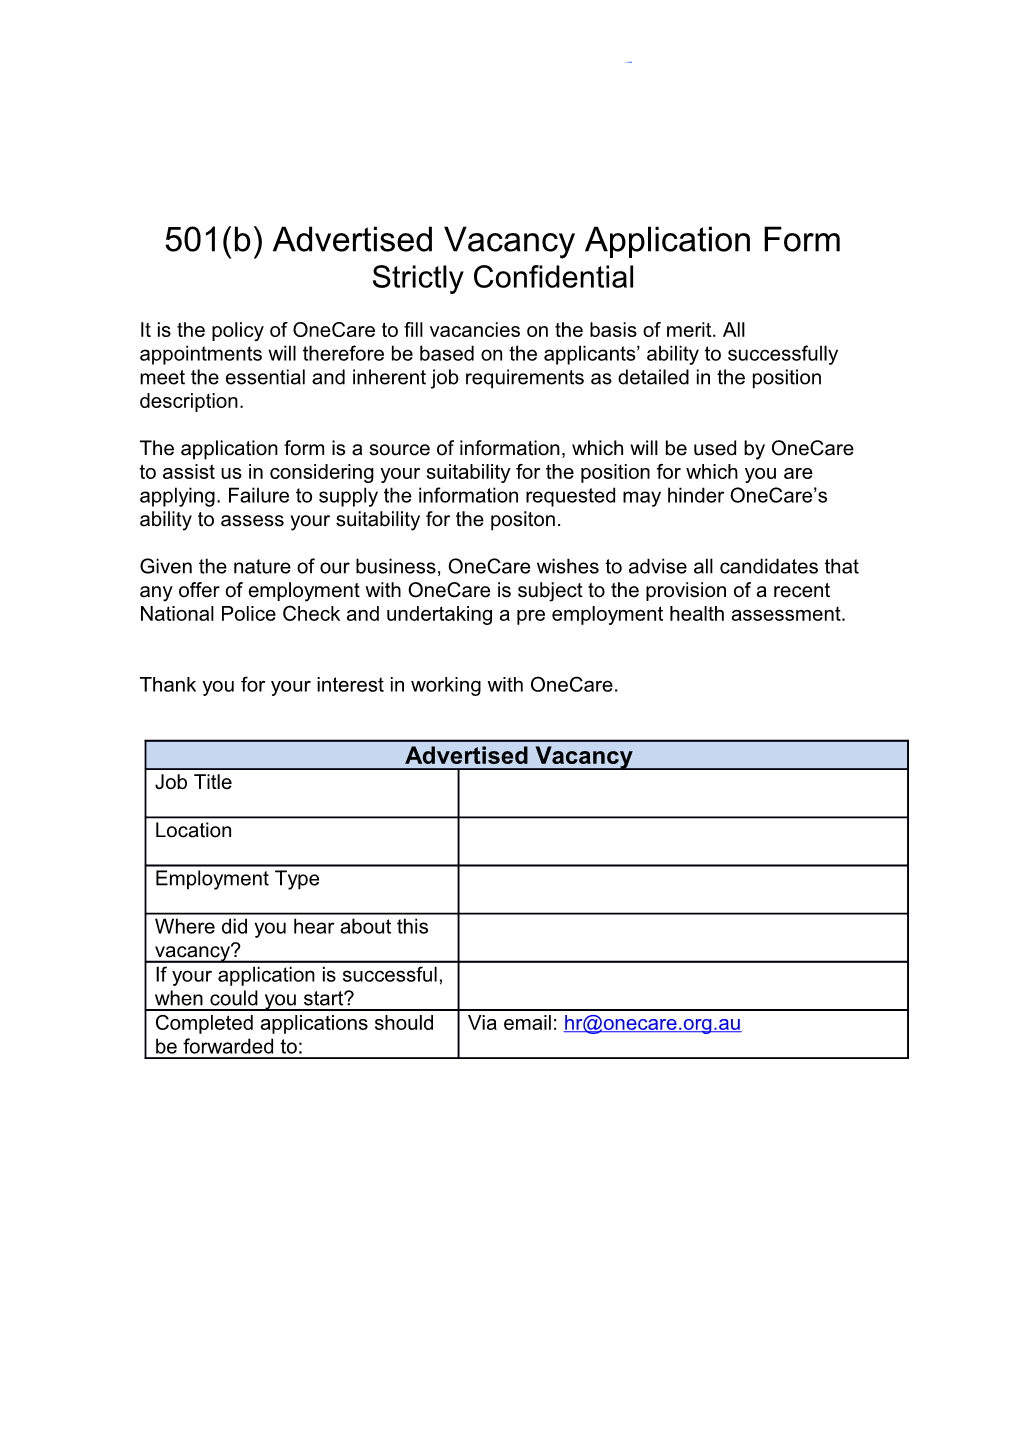 501(B) Advertised Vacancy Application Form